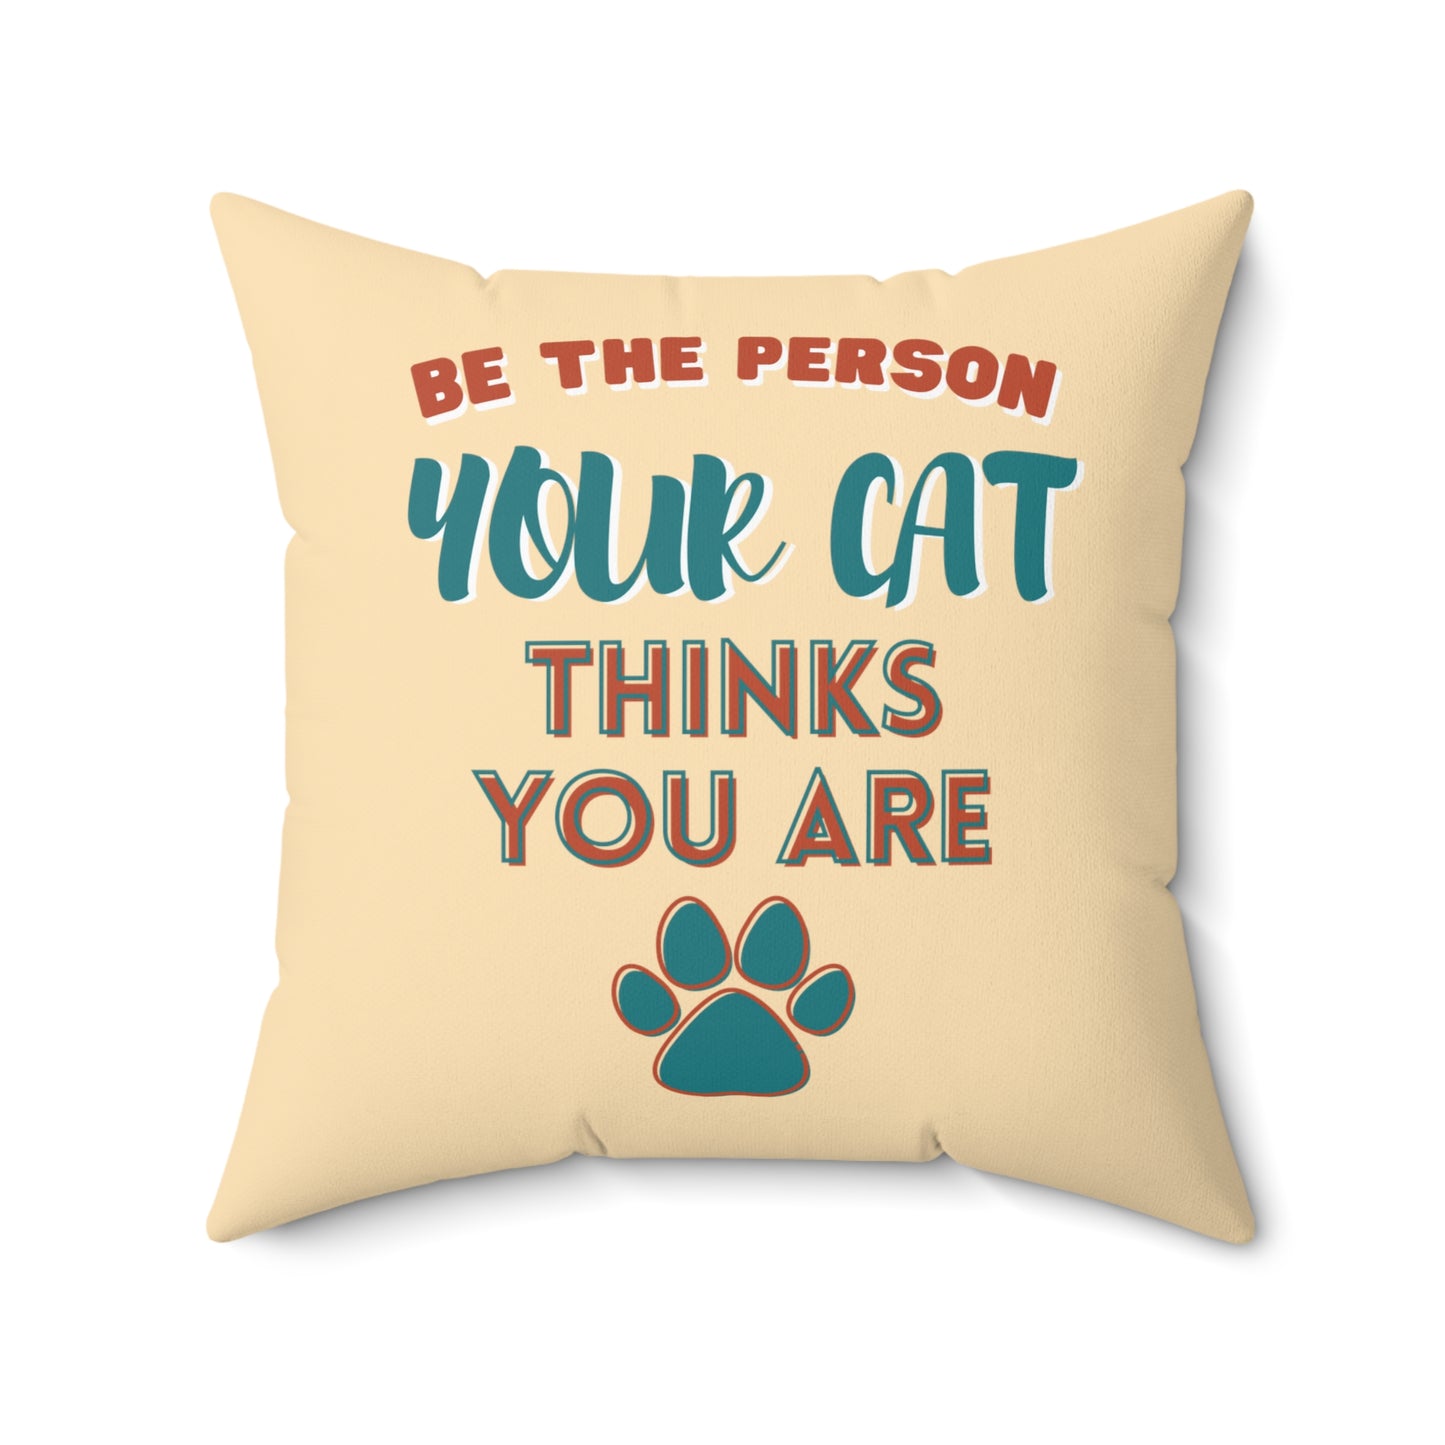 Be the person your cat thinks you are Pillow